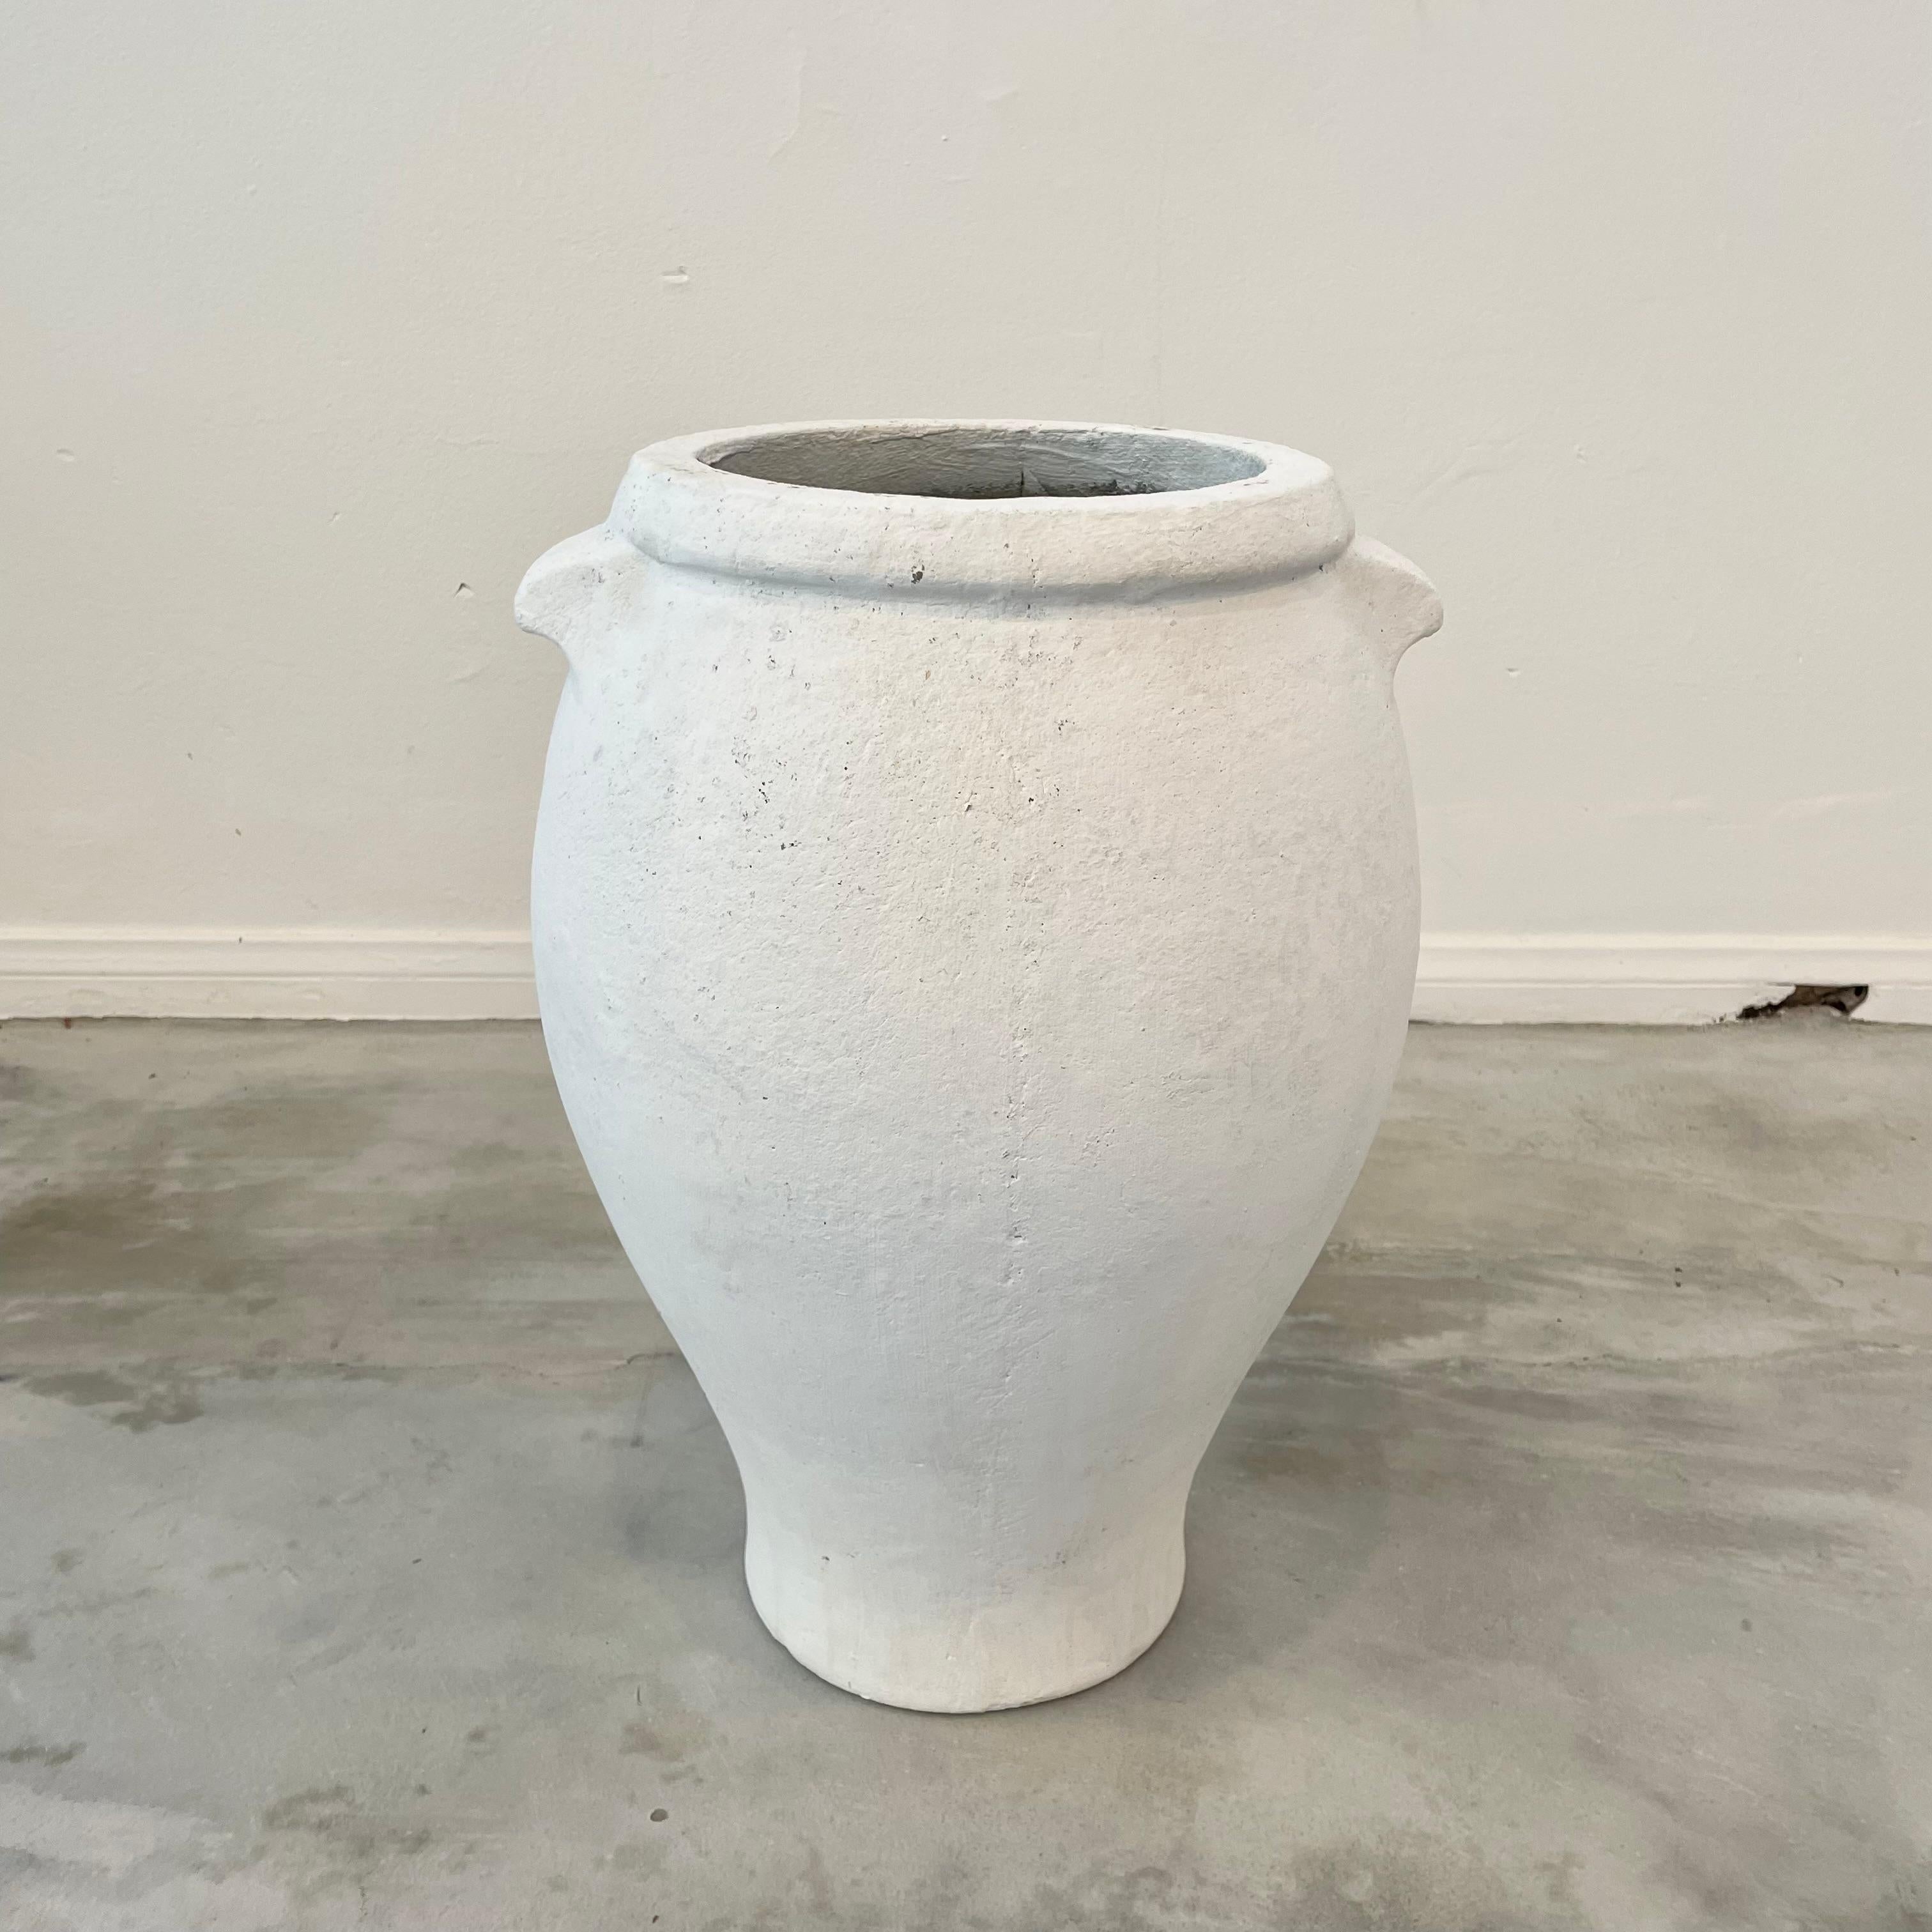 Willy Guhl Concrete Urn with Handles, 1960s Switzerland For Sale 3